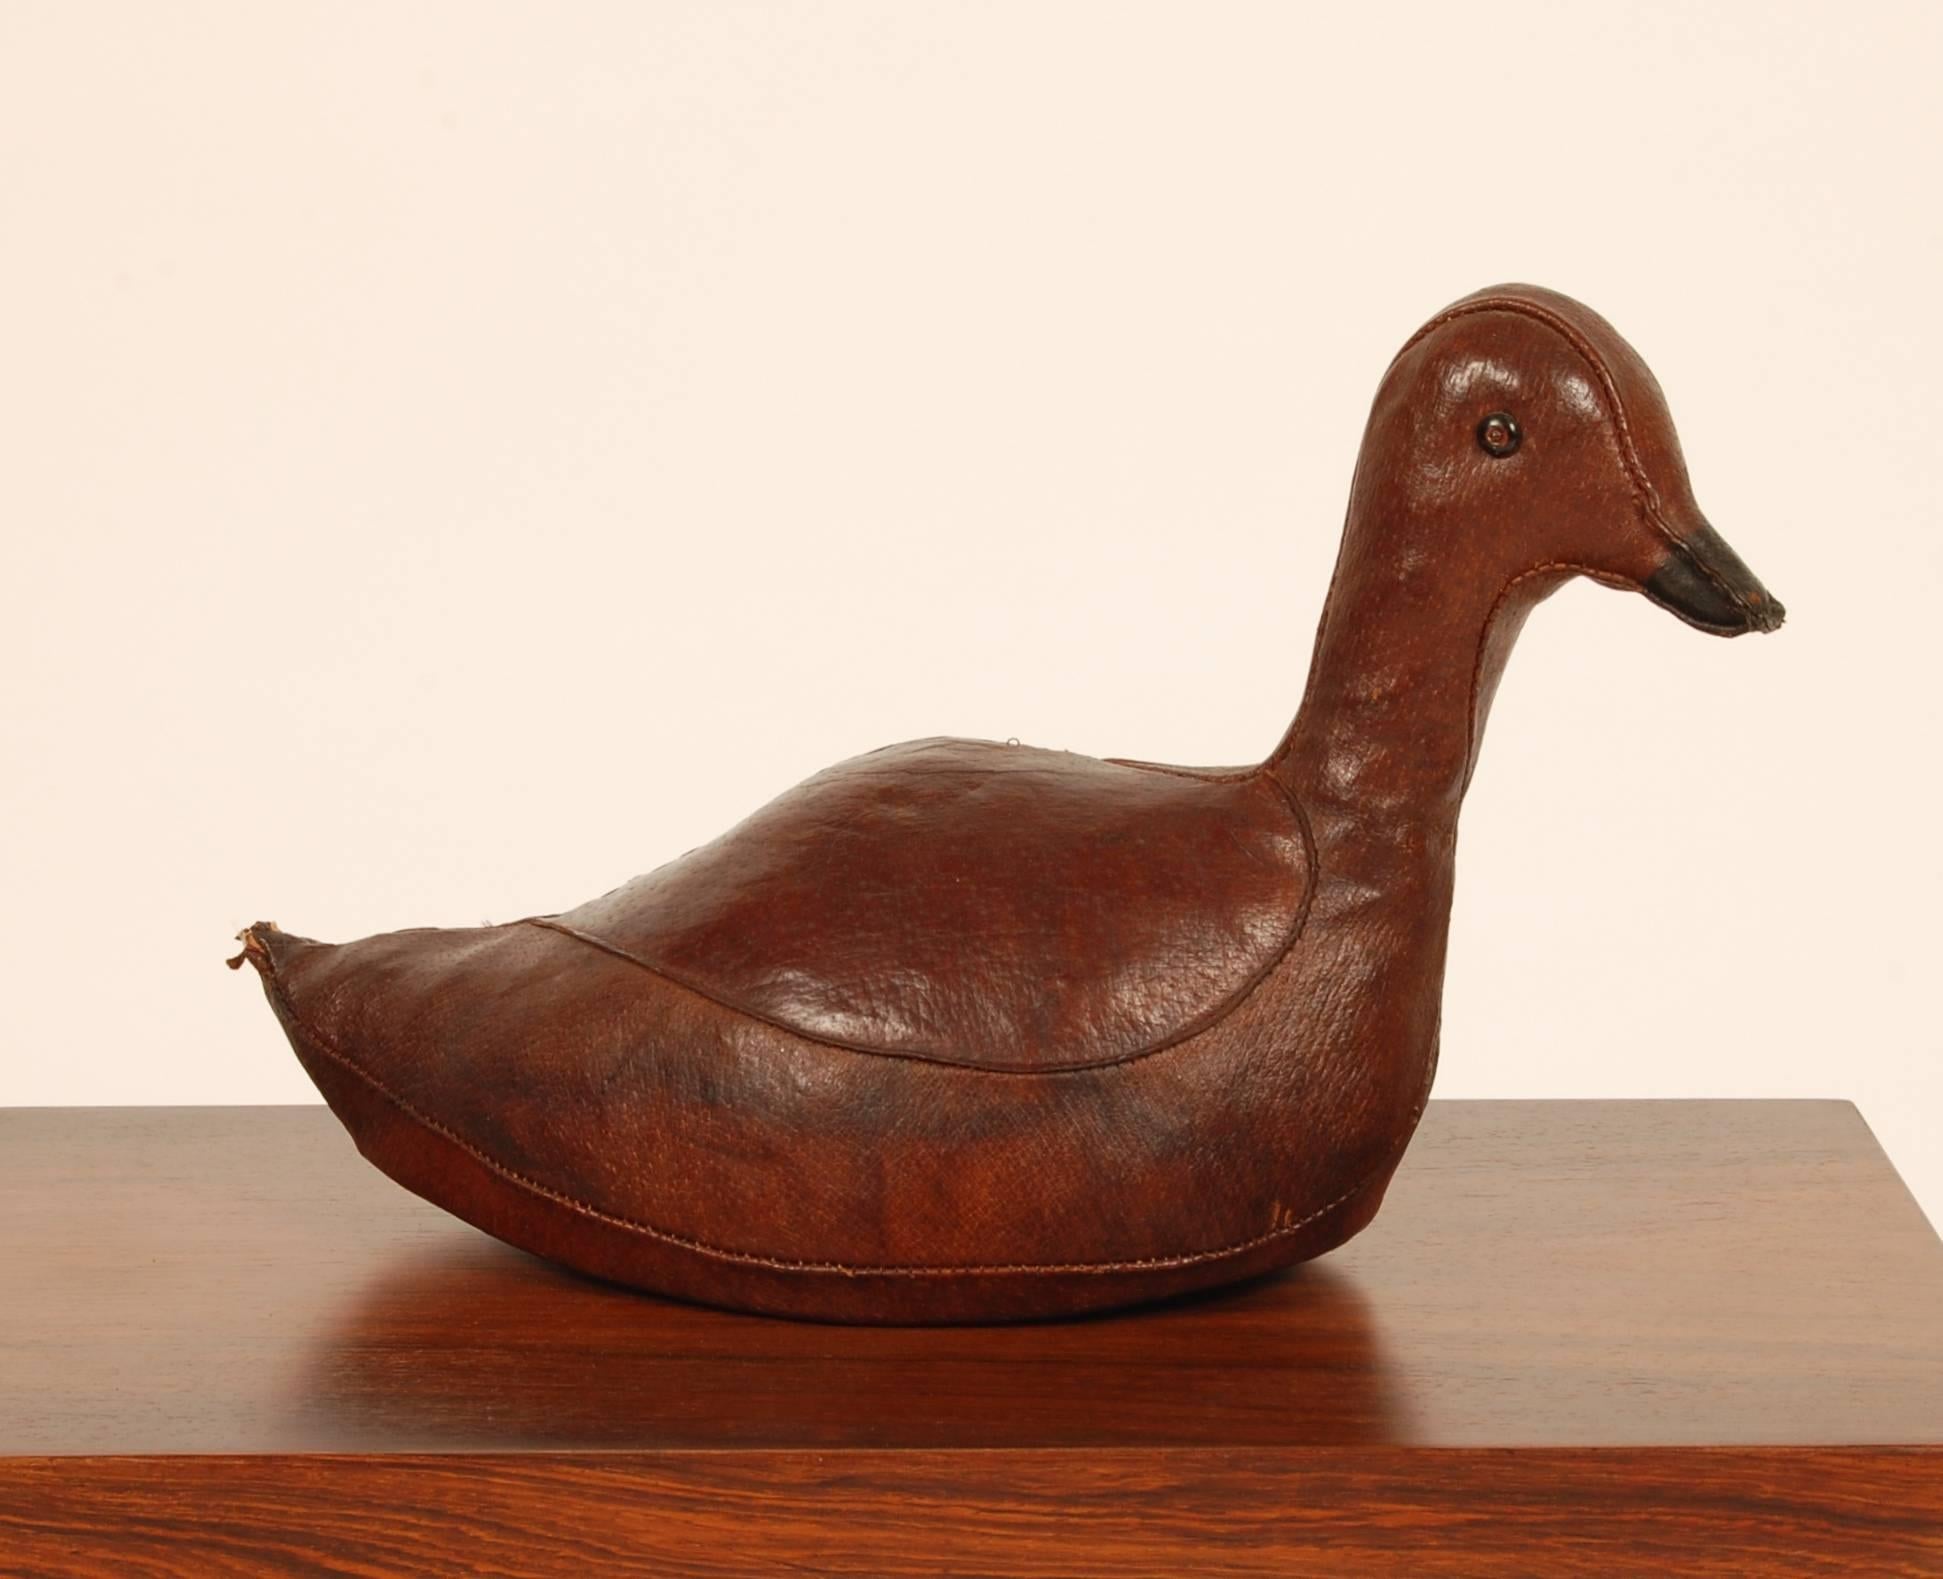 Abercrombie and Fitch Leather Duck Decoy 2